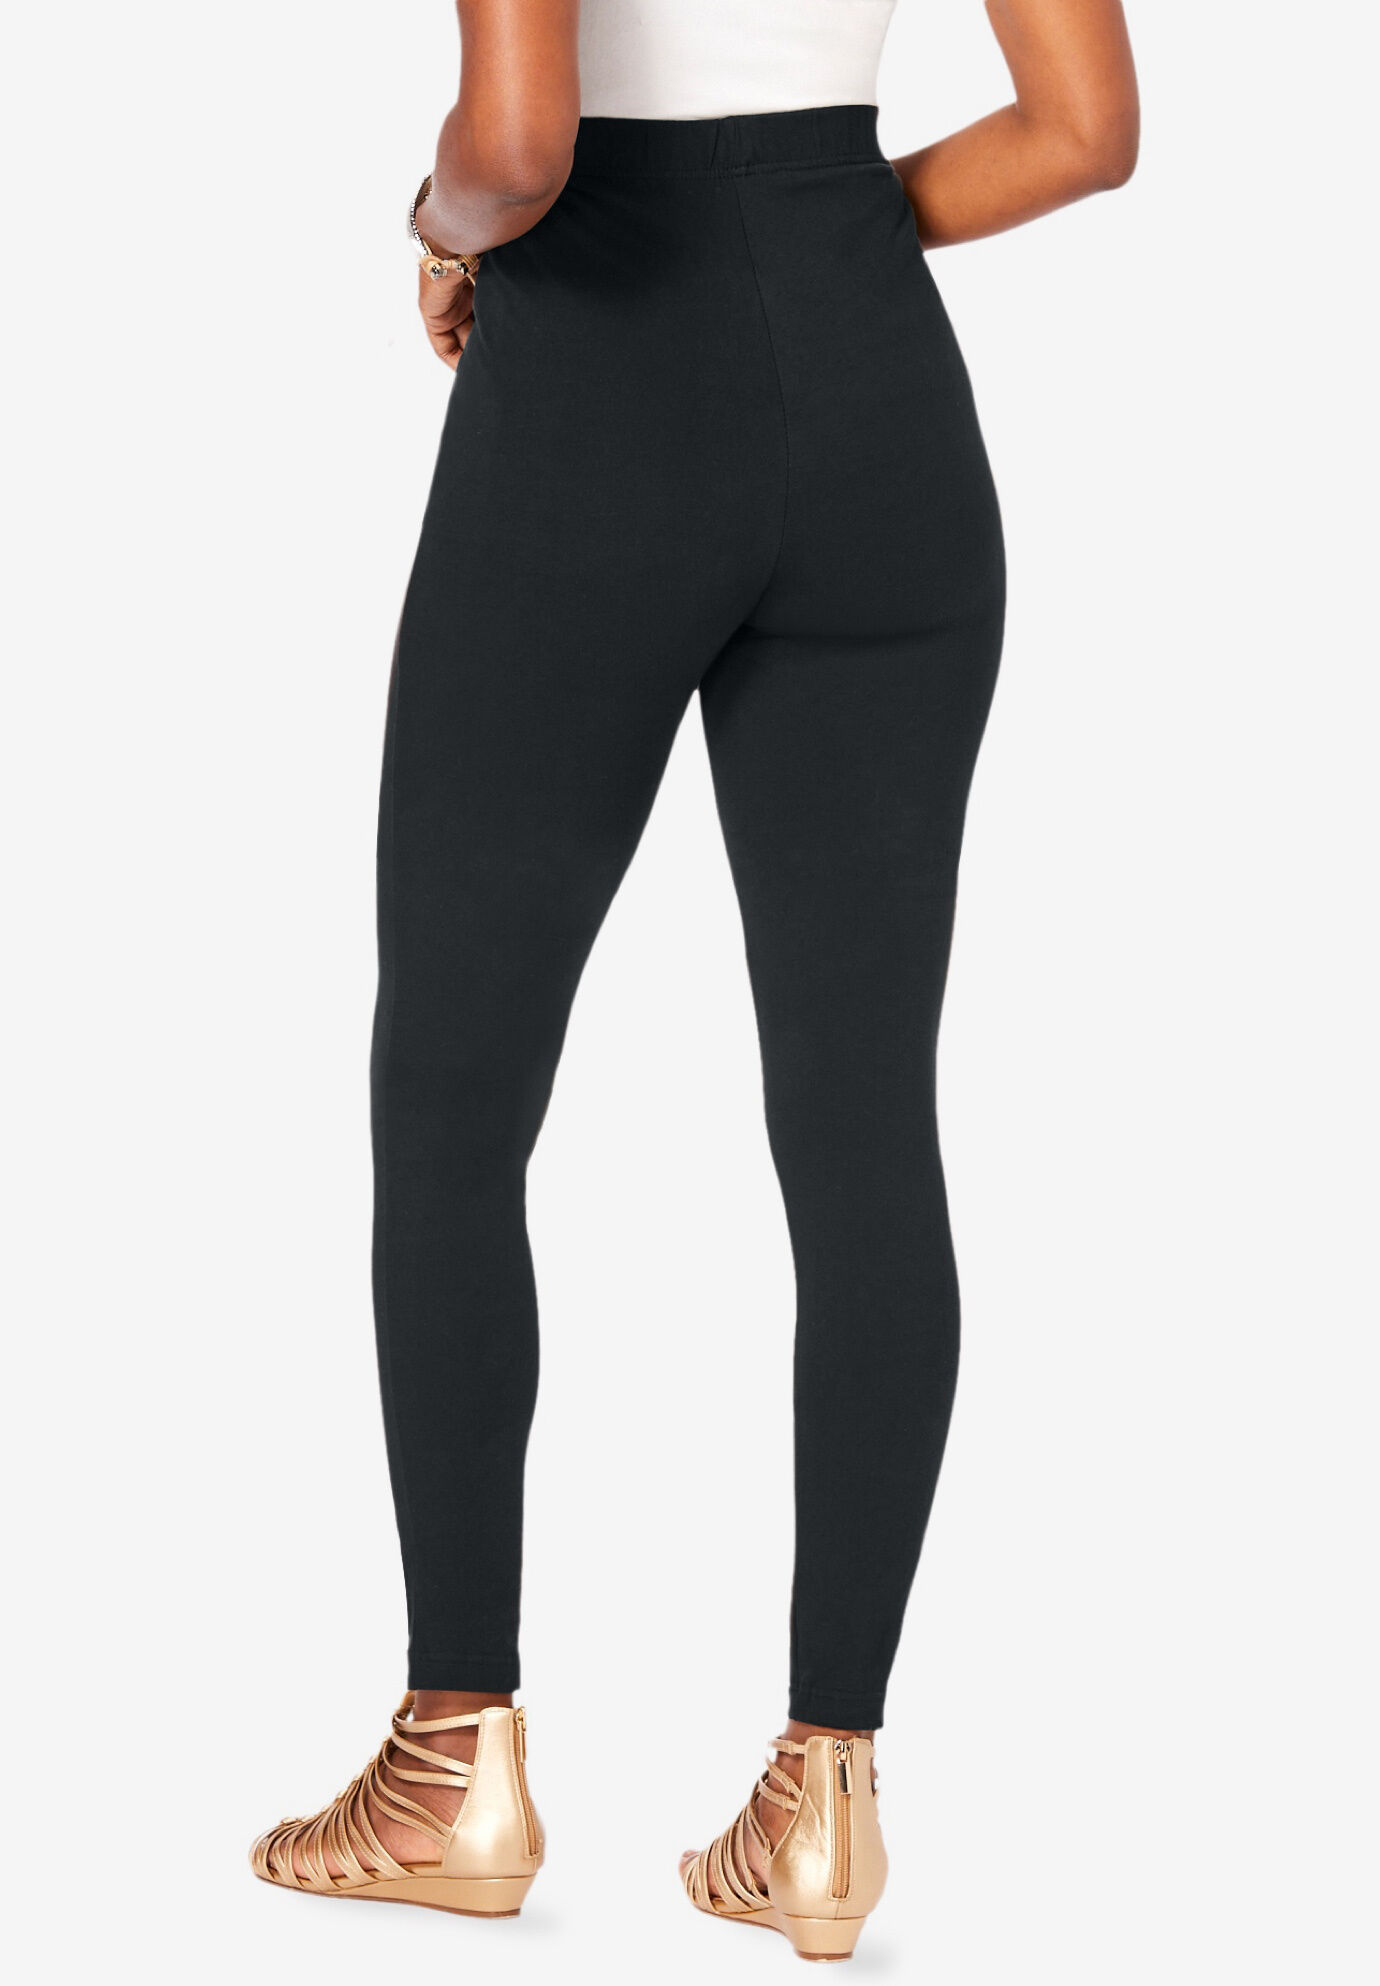 Buy PandaWears Ankle Fit Leggings - Stretch Fit (3XL, Black) at Amazon.in